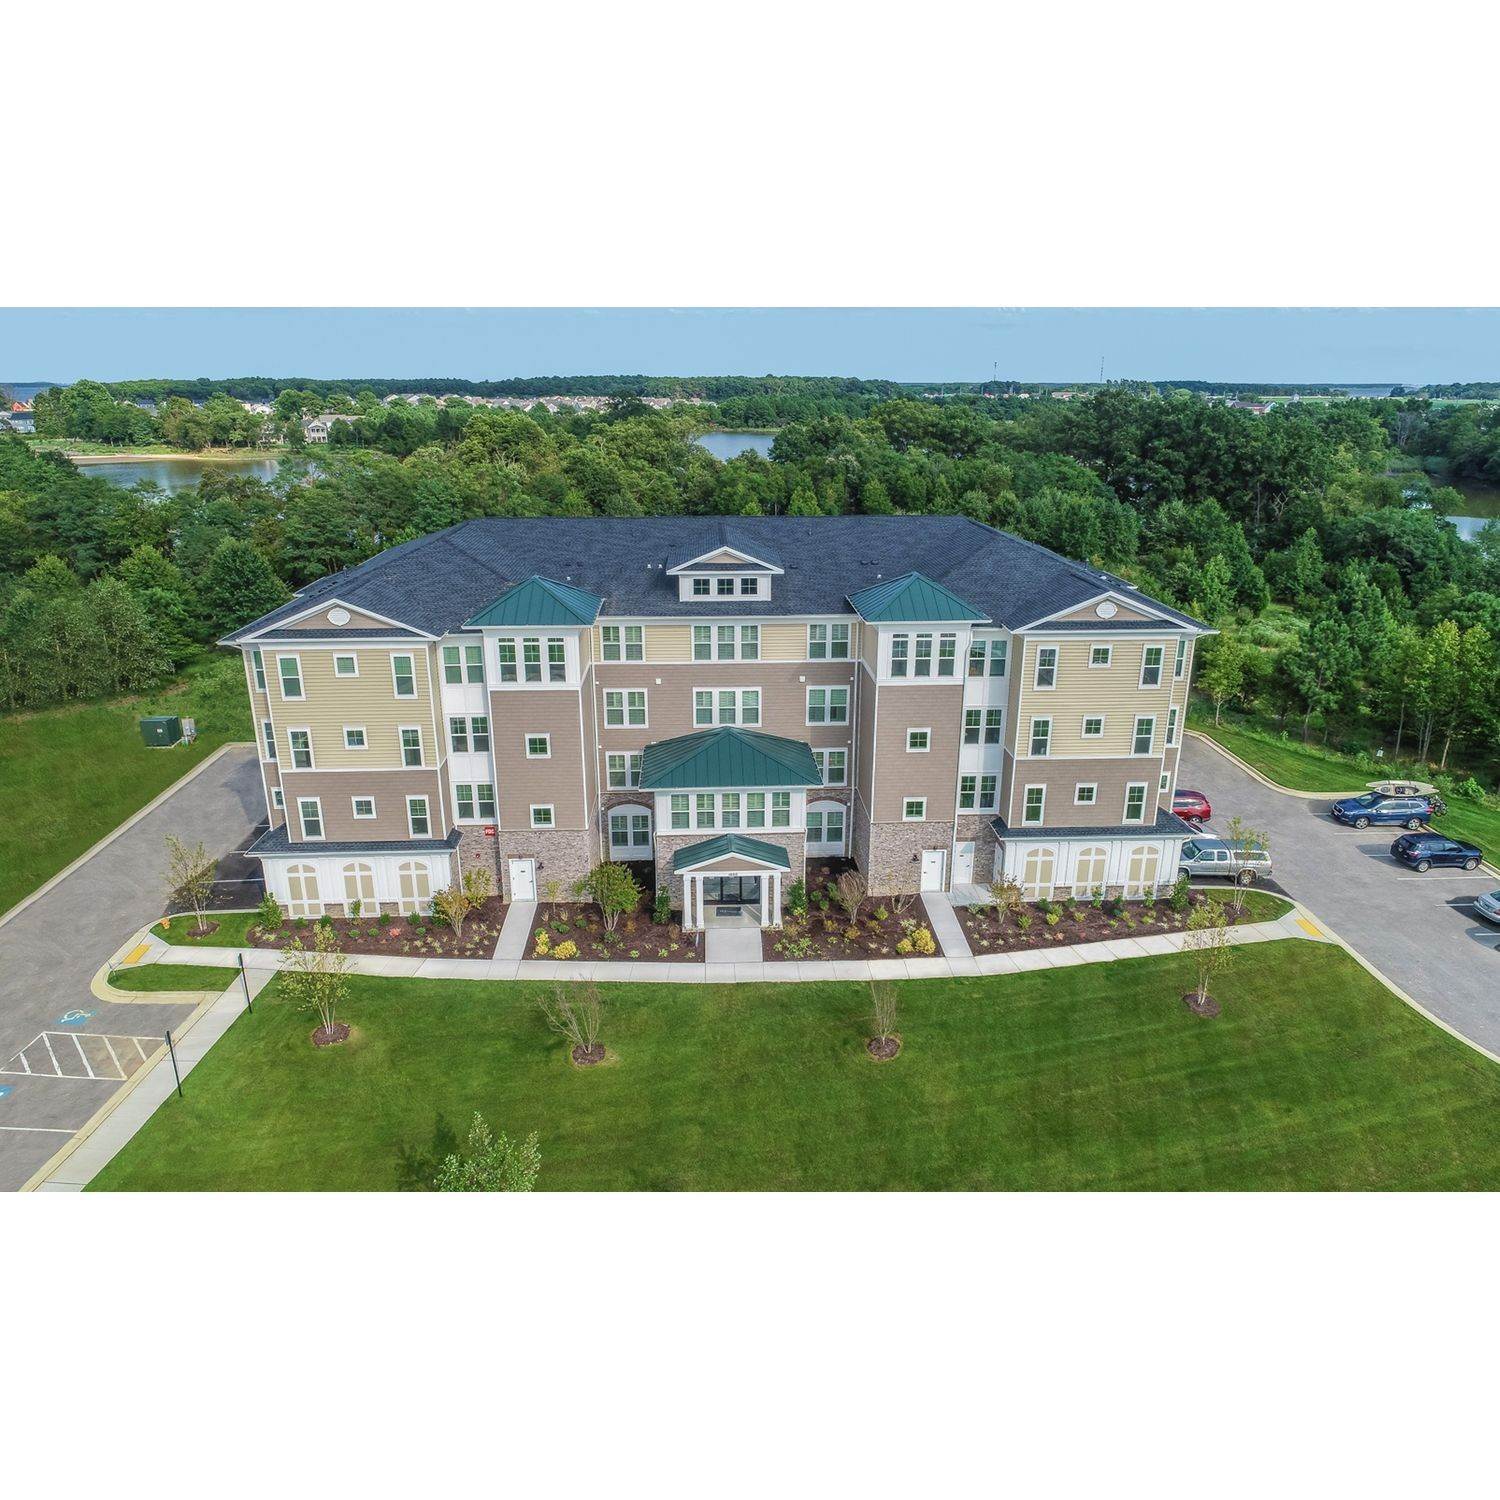 2. K. Hovnanian’s® Four Seasons at Kent Island - Luxury Condos building at 131 Flycatcher Way, Chester, MD 21619